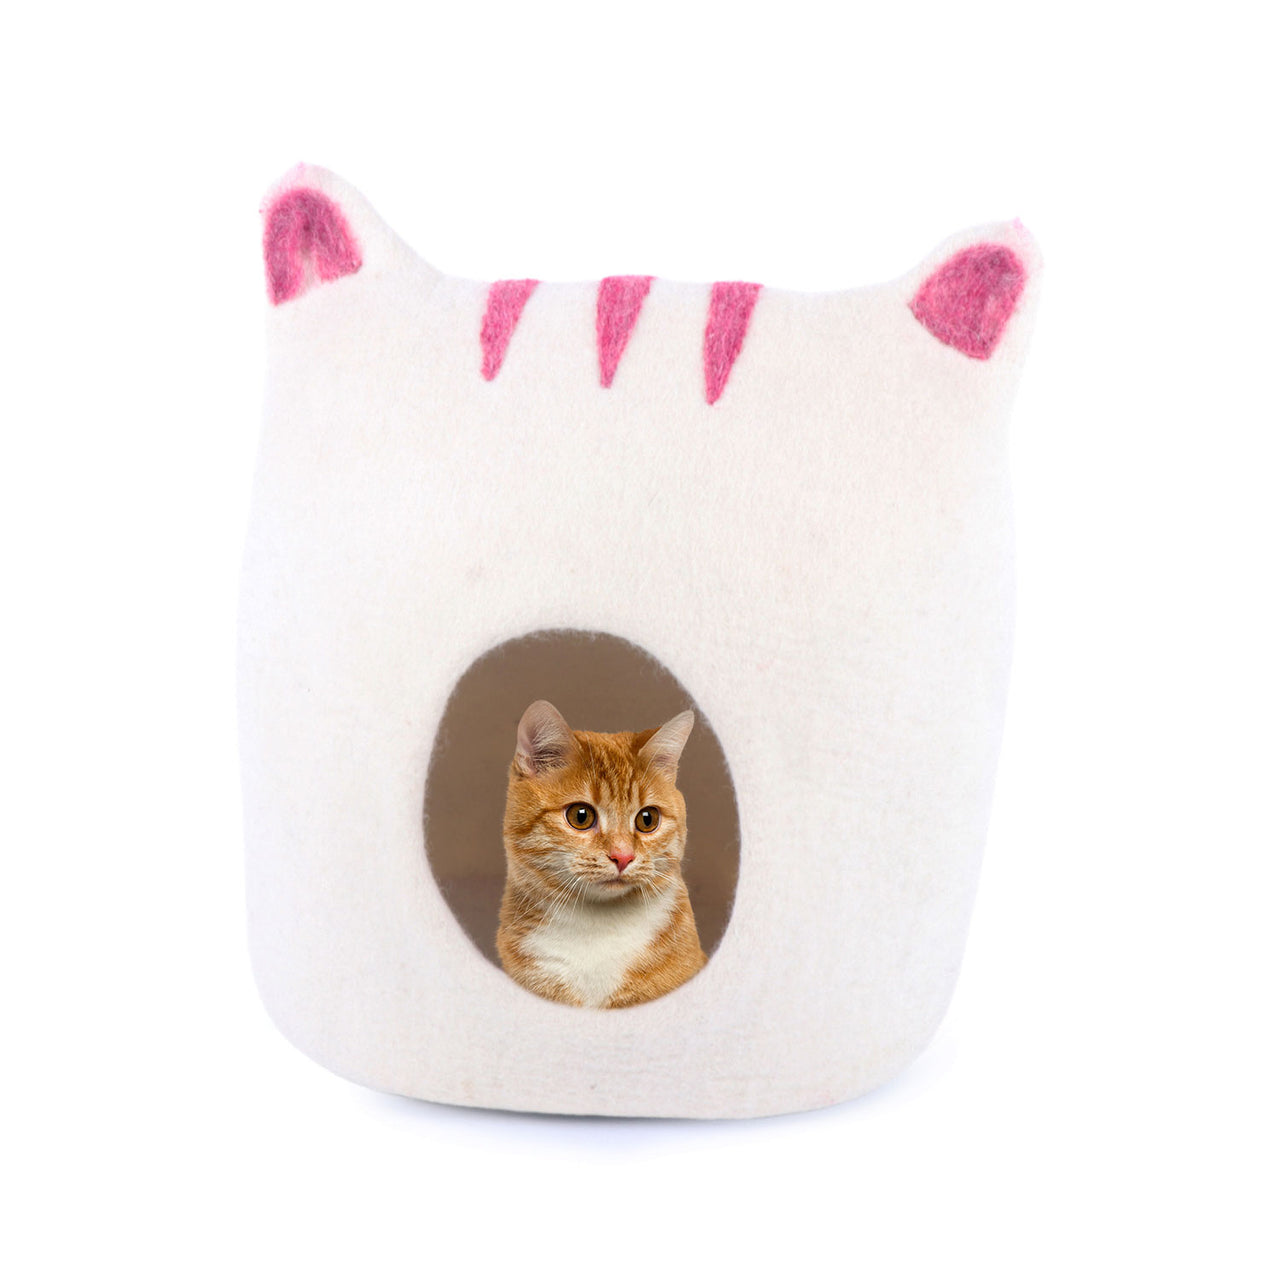 Mokoboho 100% Wool Felt Cat Cave  Bed Handmade in Nepal with Free Mouse Toy Included (Gray Tan Cream) 価格比較